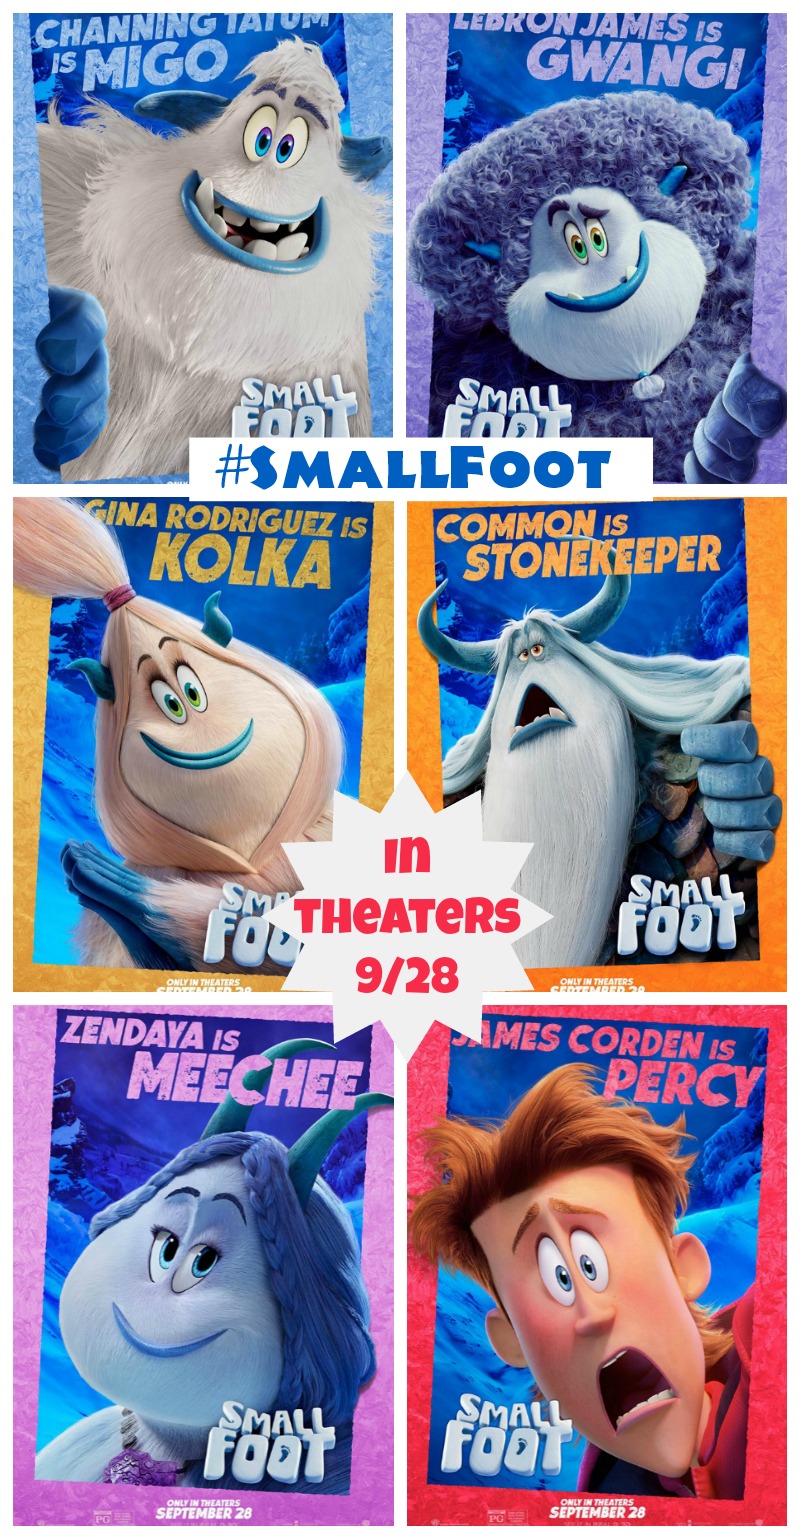 Not every legend is a tall tale. Watch the new trailer for #SMALLFOOT – in theaters September 28.